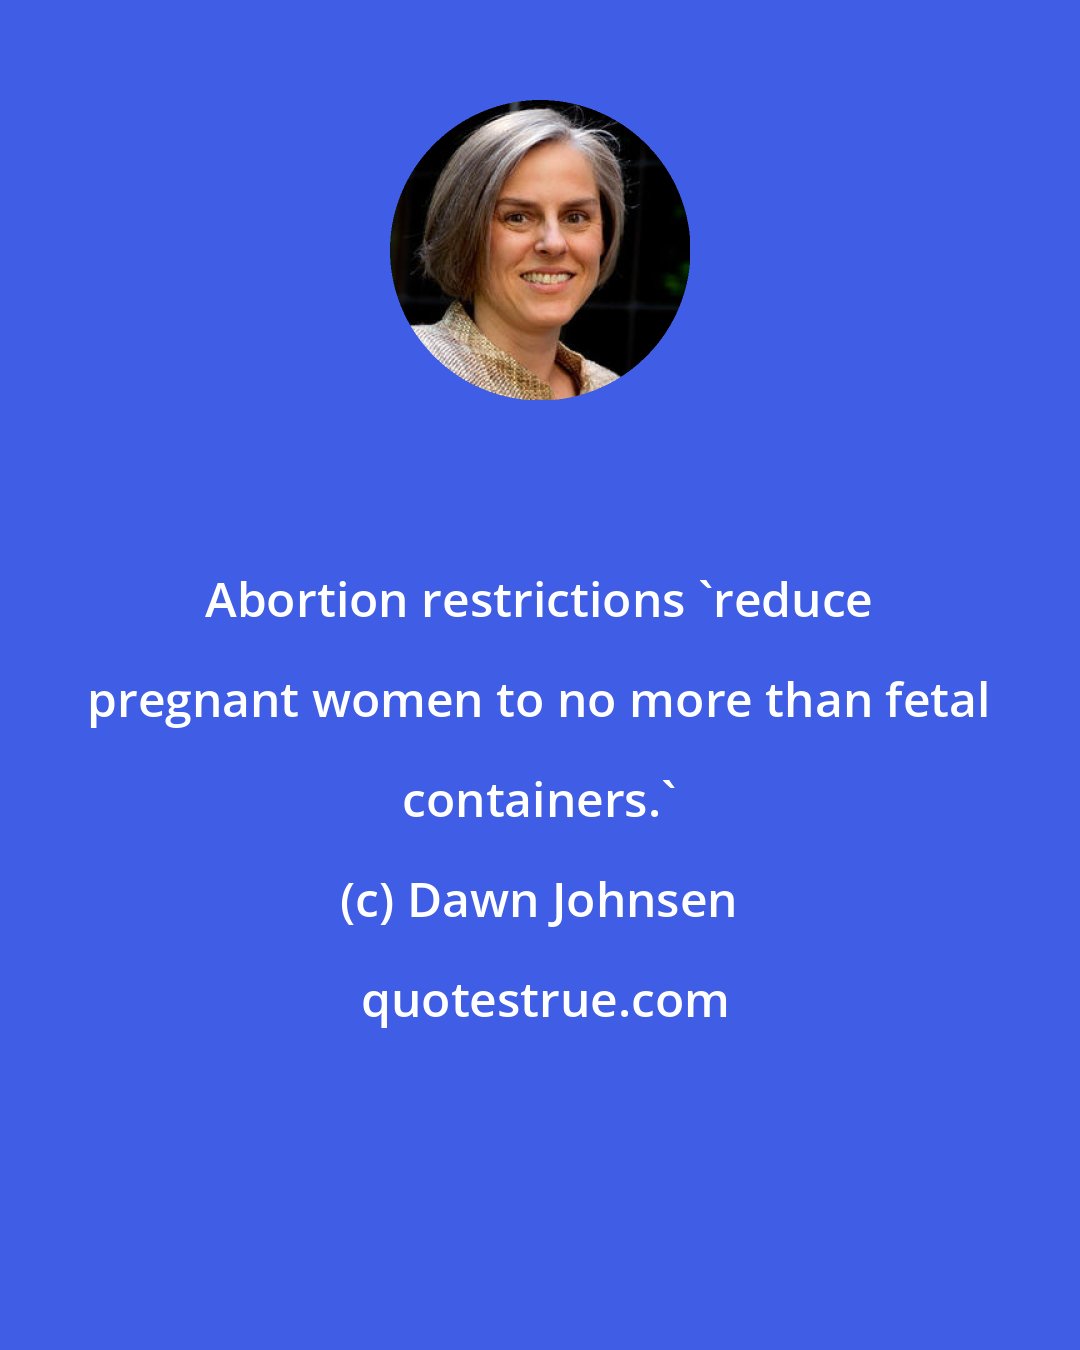 Dawn Johnsen: Abortion restrictions 'reduce pregnant women to no more than fetal containers.'